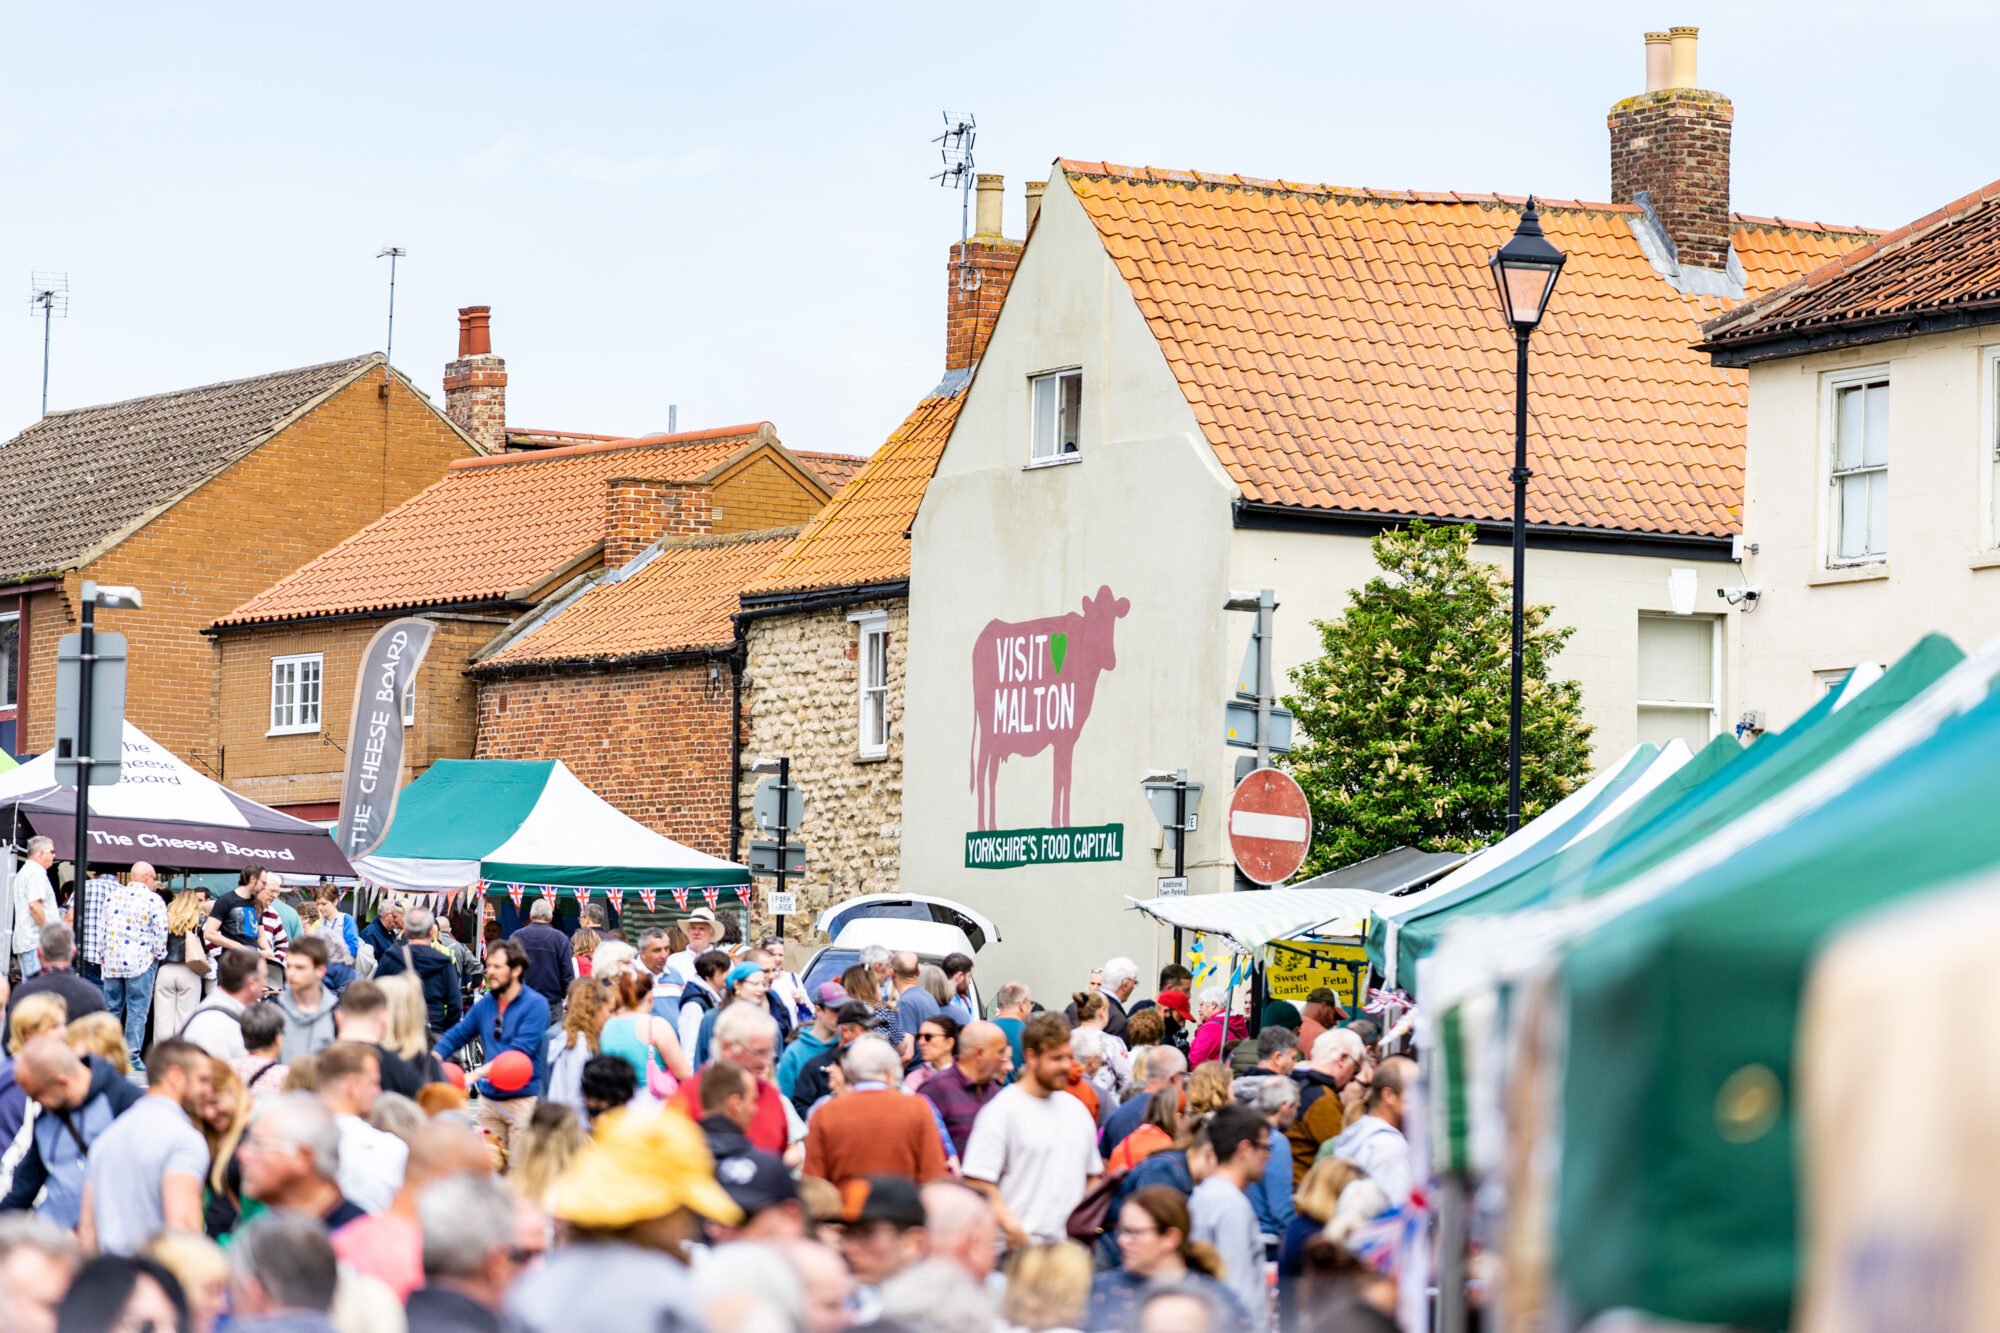 Image name Crowds Market Place East. Malton Food Festival 3 June 2022. Photo Credit milnerCreative on behalf of Visit Malton the 1 image from the post Events in Yorkshire.com.